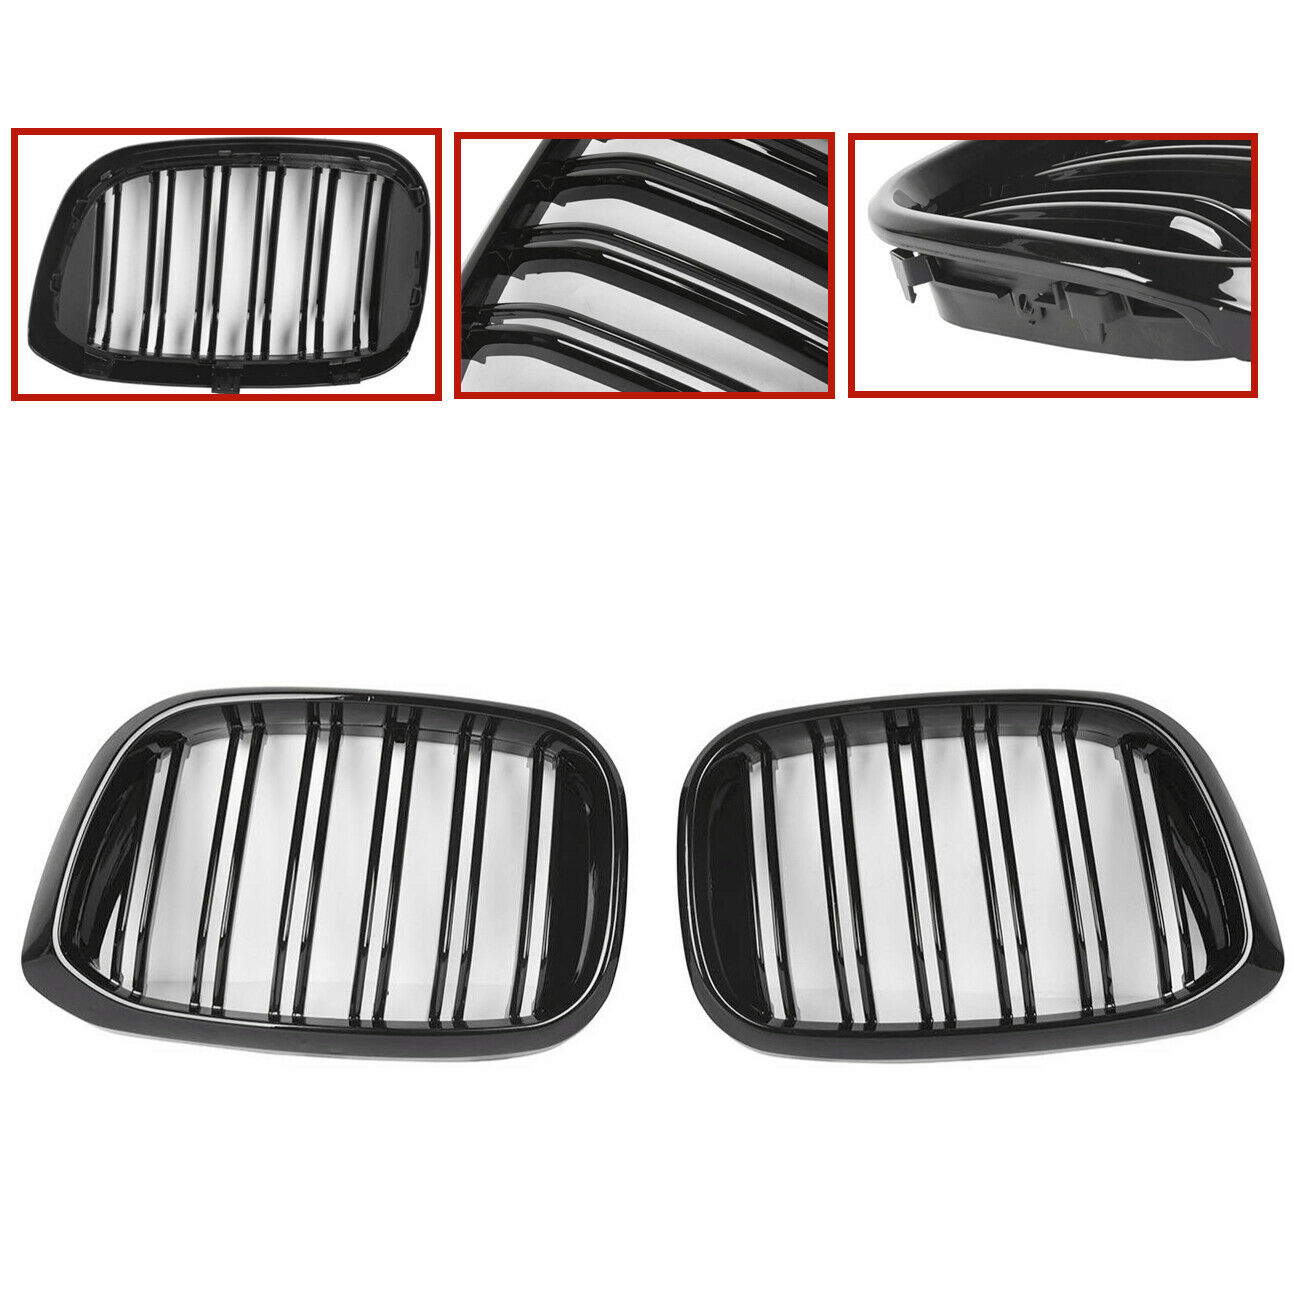 Gloss Black Front Bumper Bar Kidney Grille for BMW X3 G01 X4 G02 X3M X4M Style